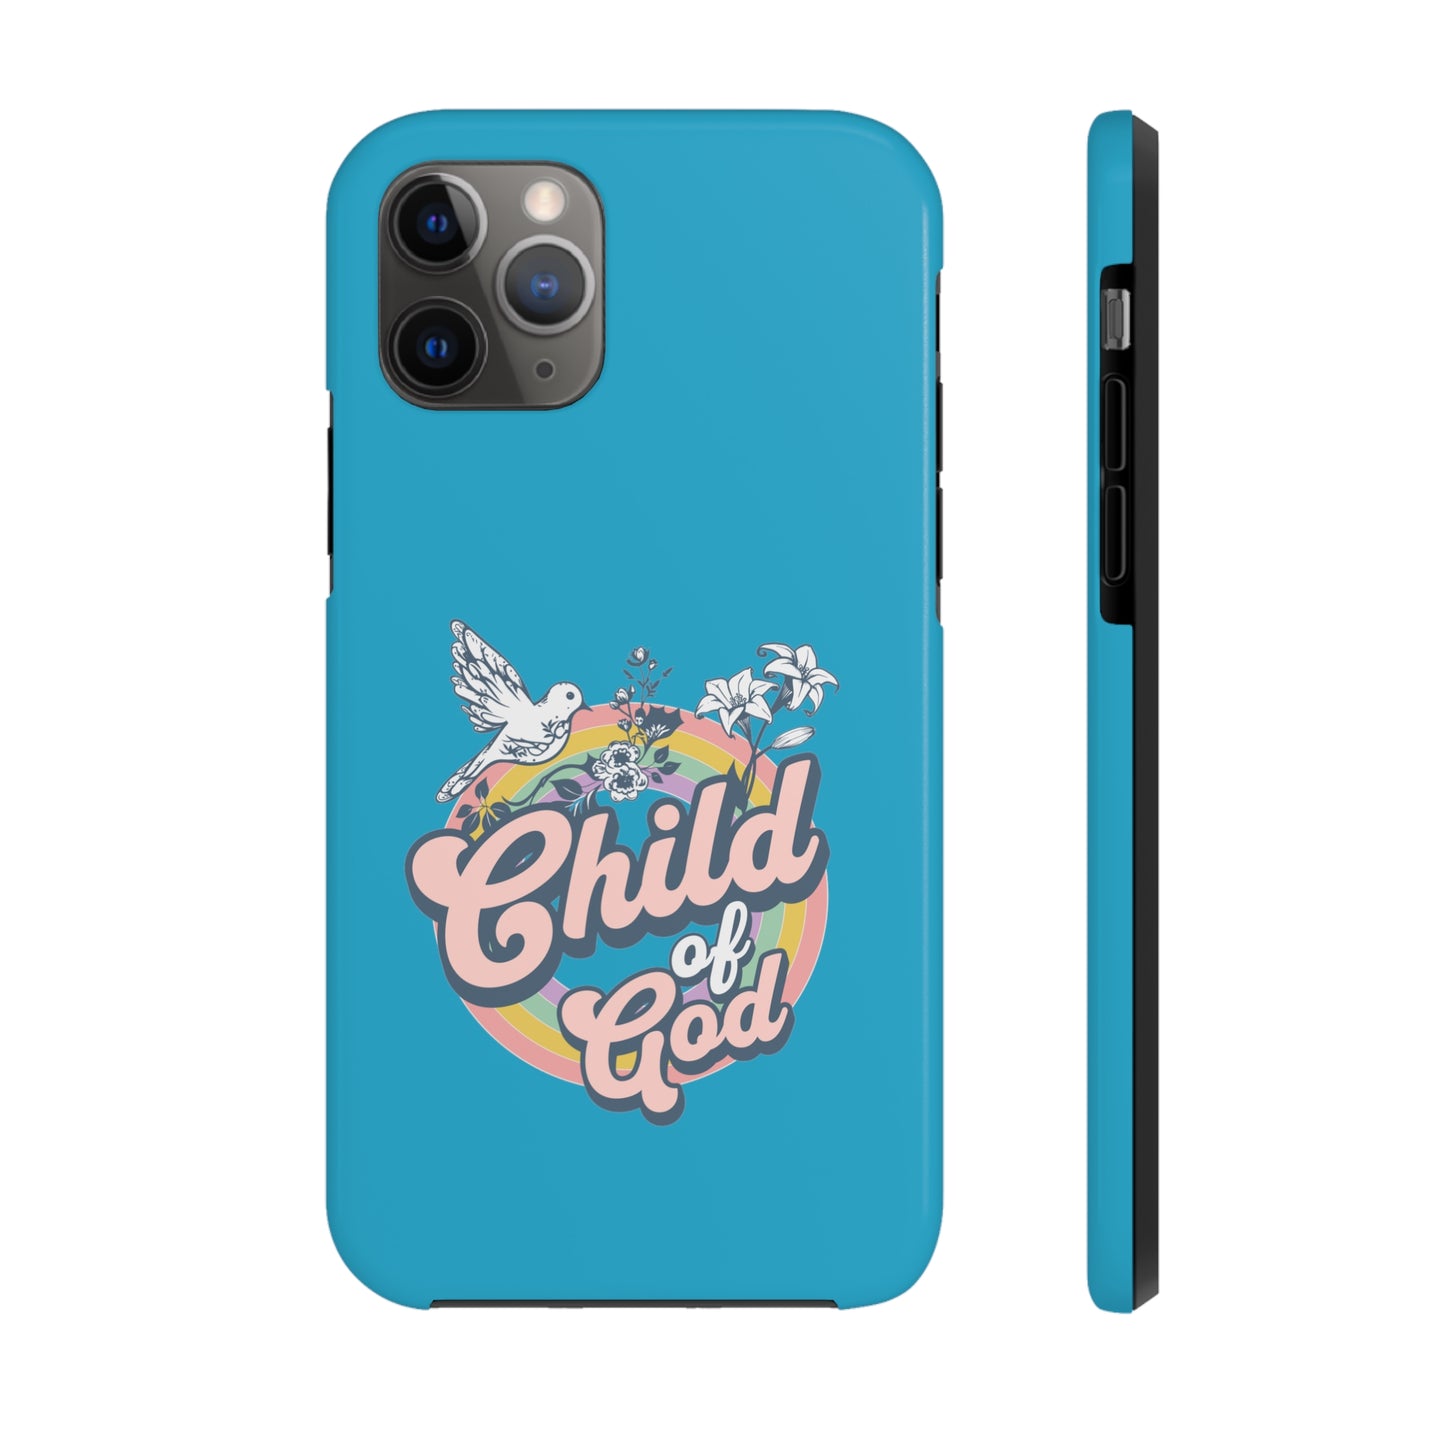 Child of God Tough Phone Cases - Turquoise